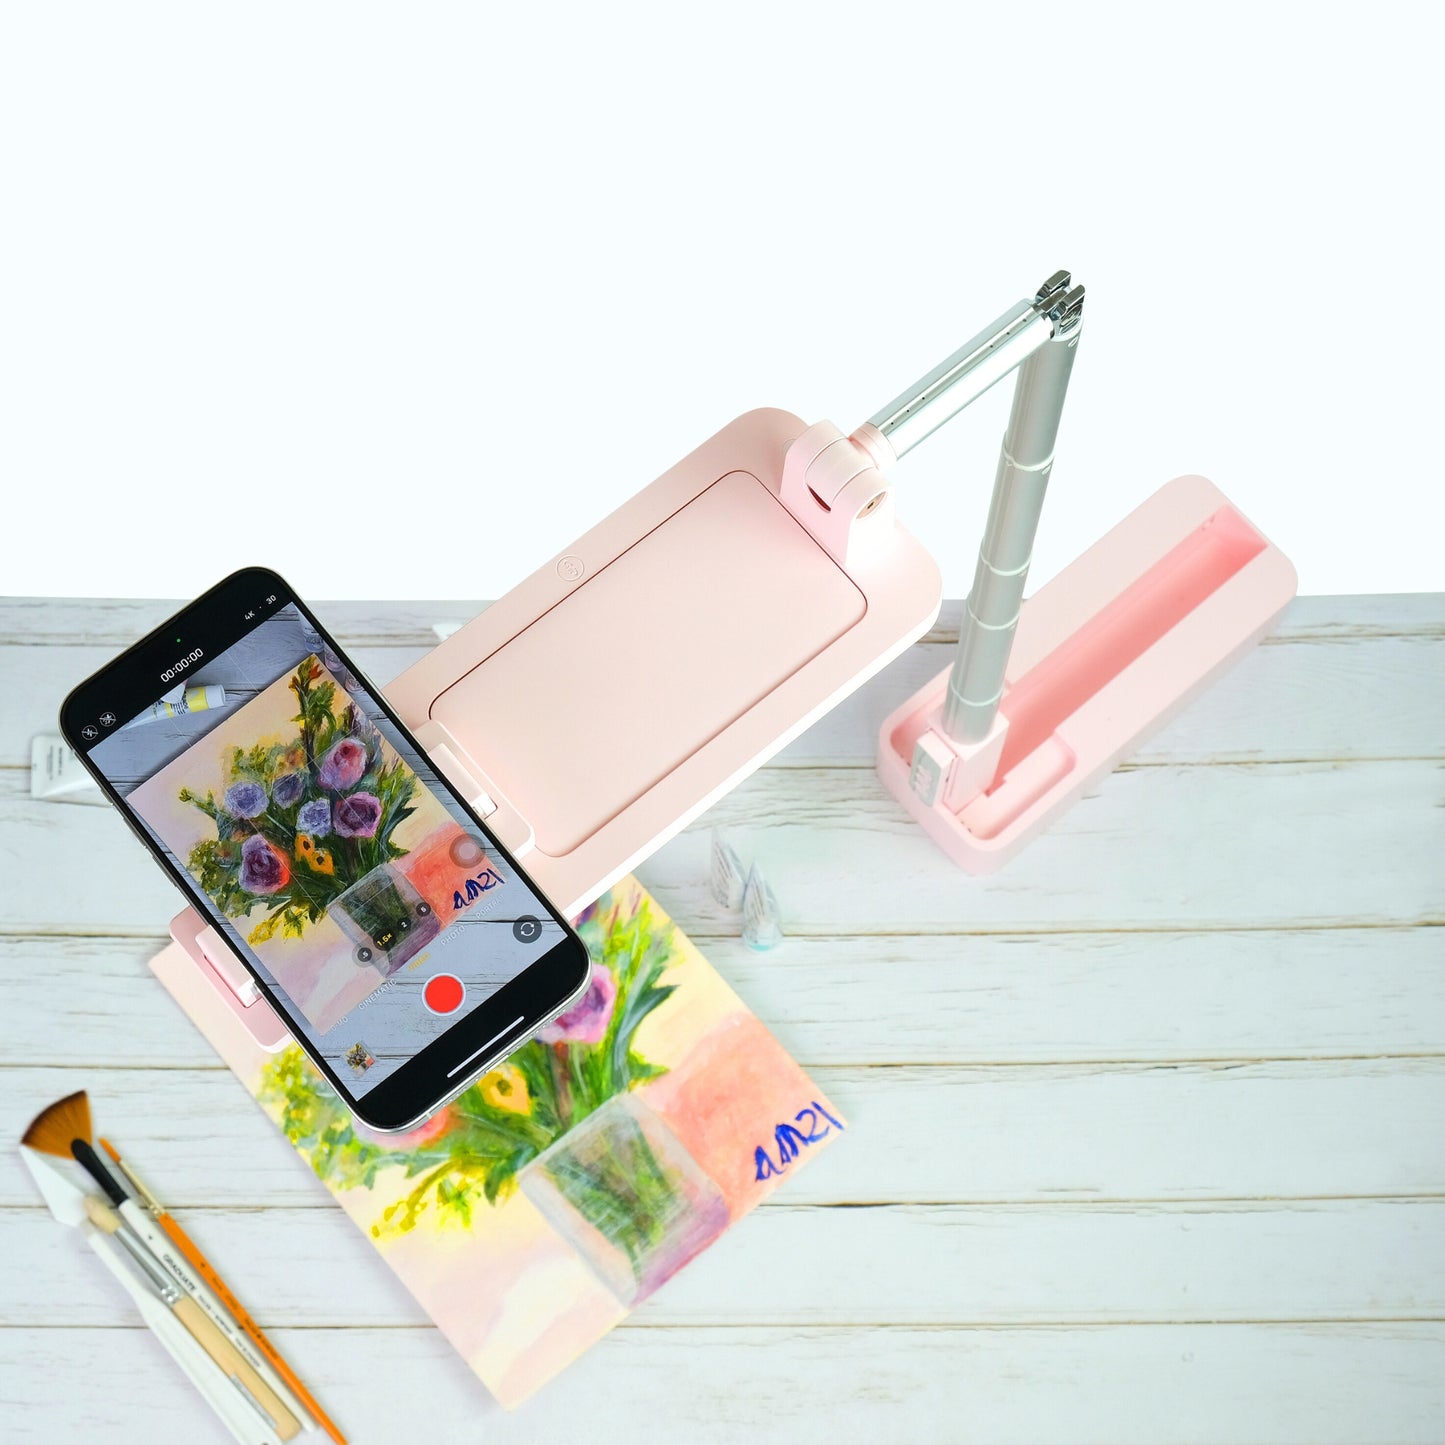 Olivia Overhead Phone Stand Tripod With Light Pink Overhead with art